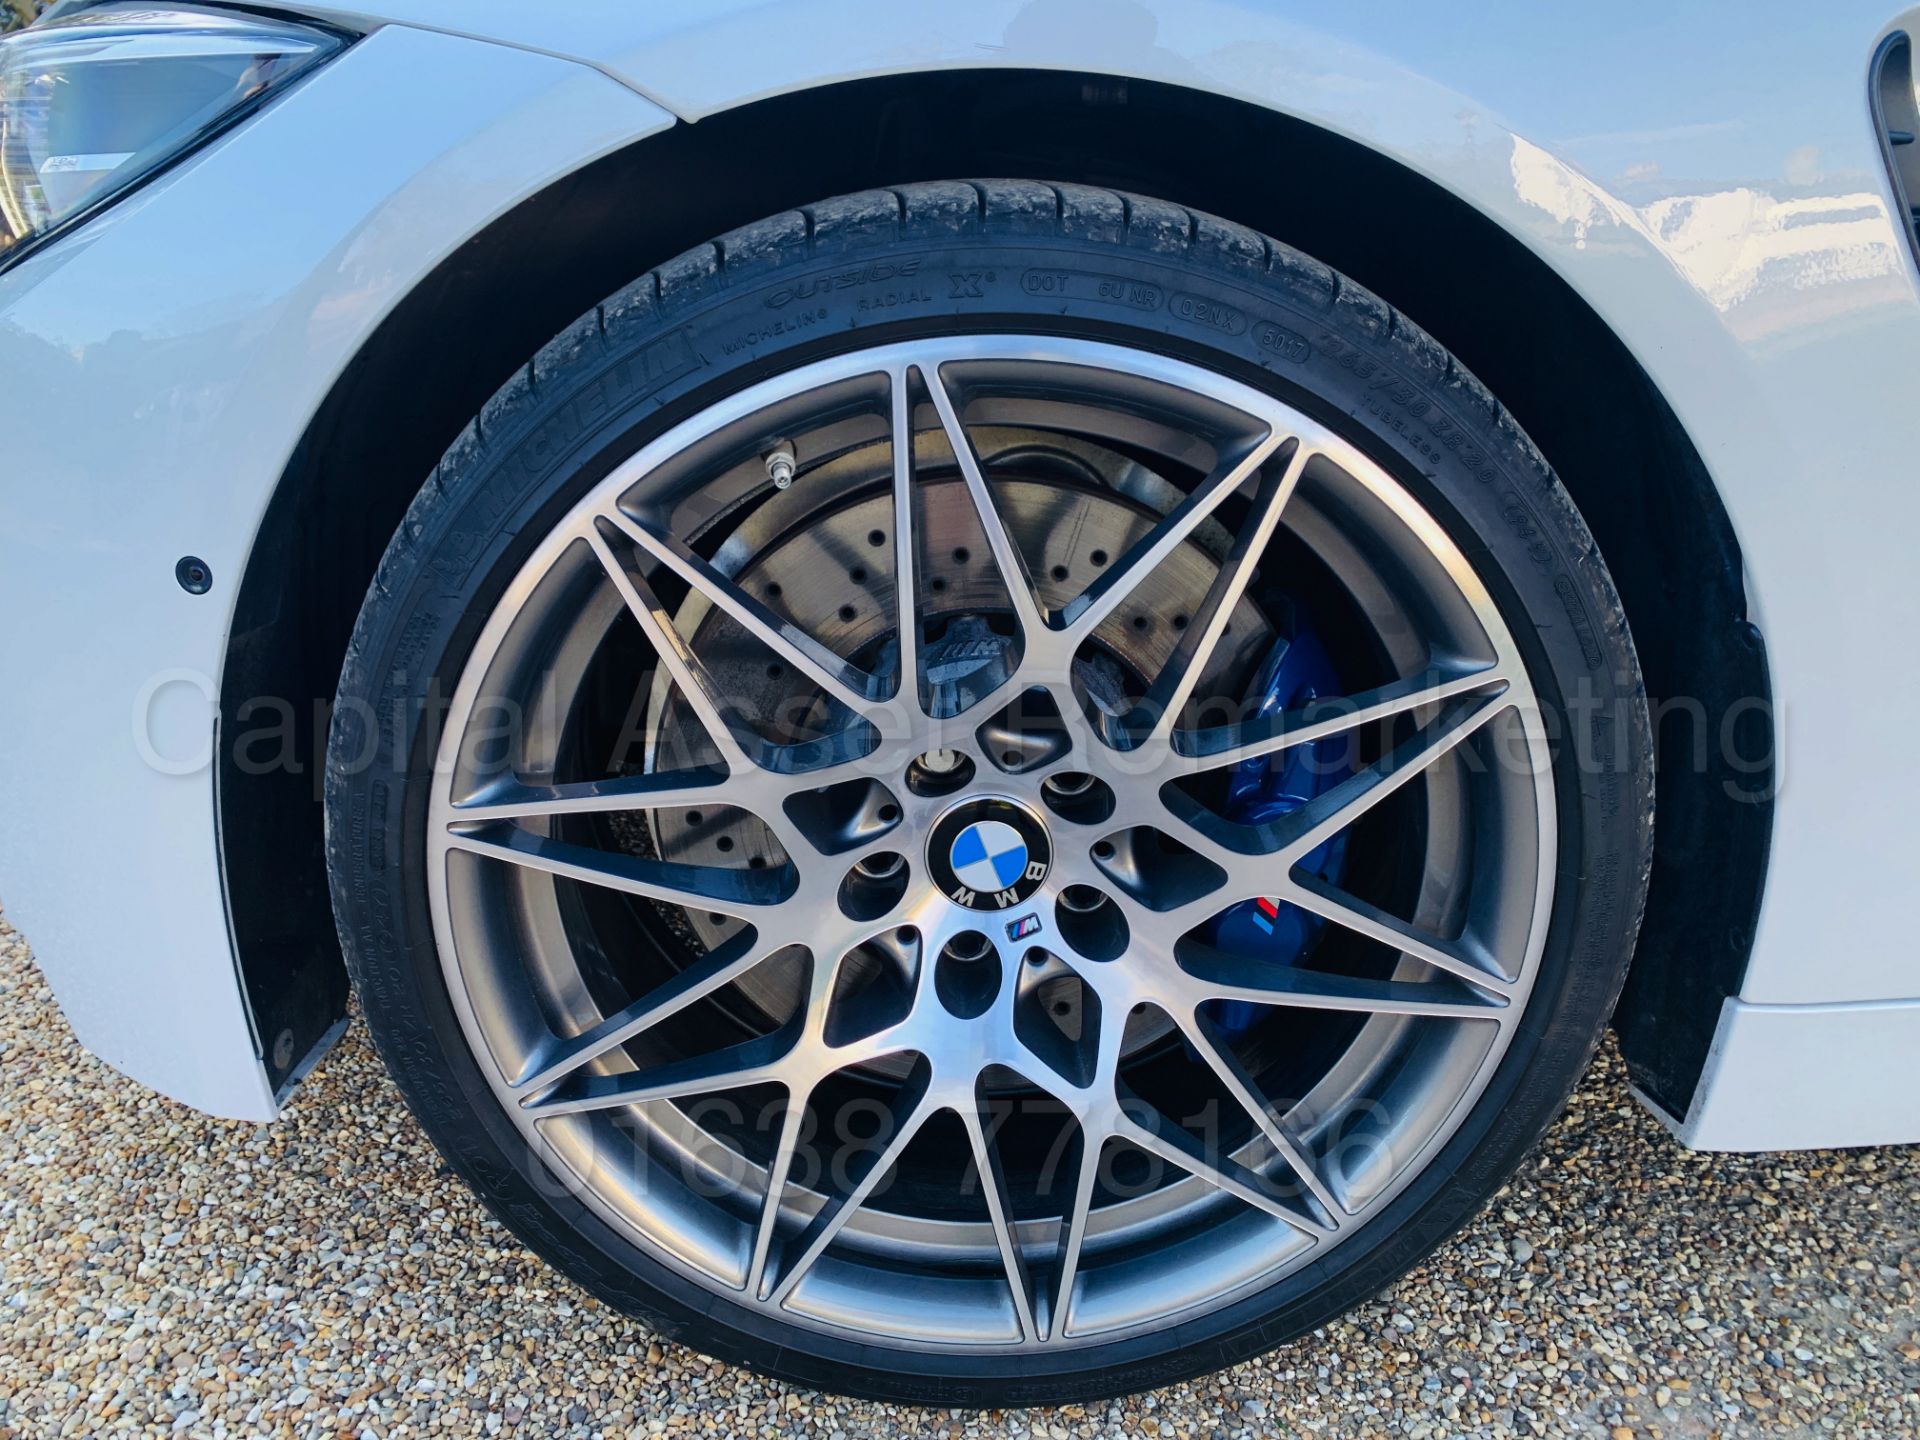 ON SALE BMW M4 CONVERTIBLE *COMPETITION PACKAGE* (2018 MODEL) '431 BHP - M DCT AUTO' WOW!!!!! - Image 32 of 89